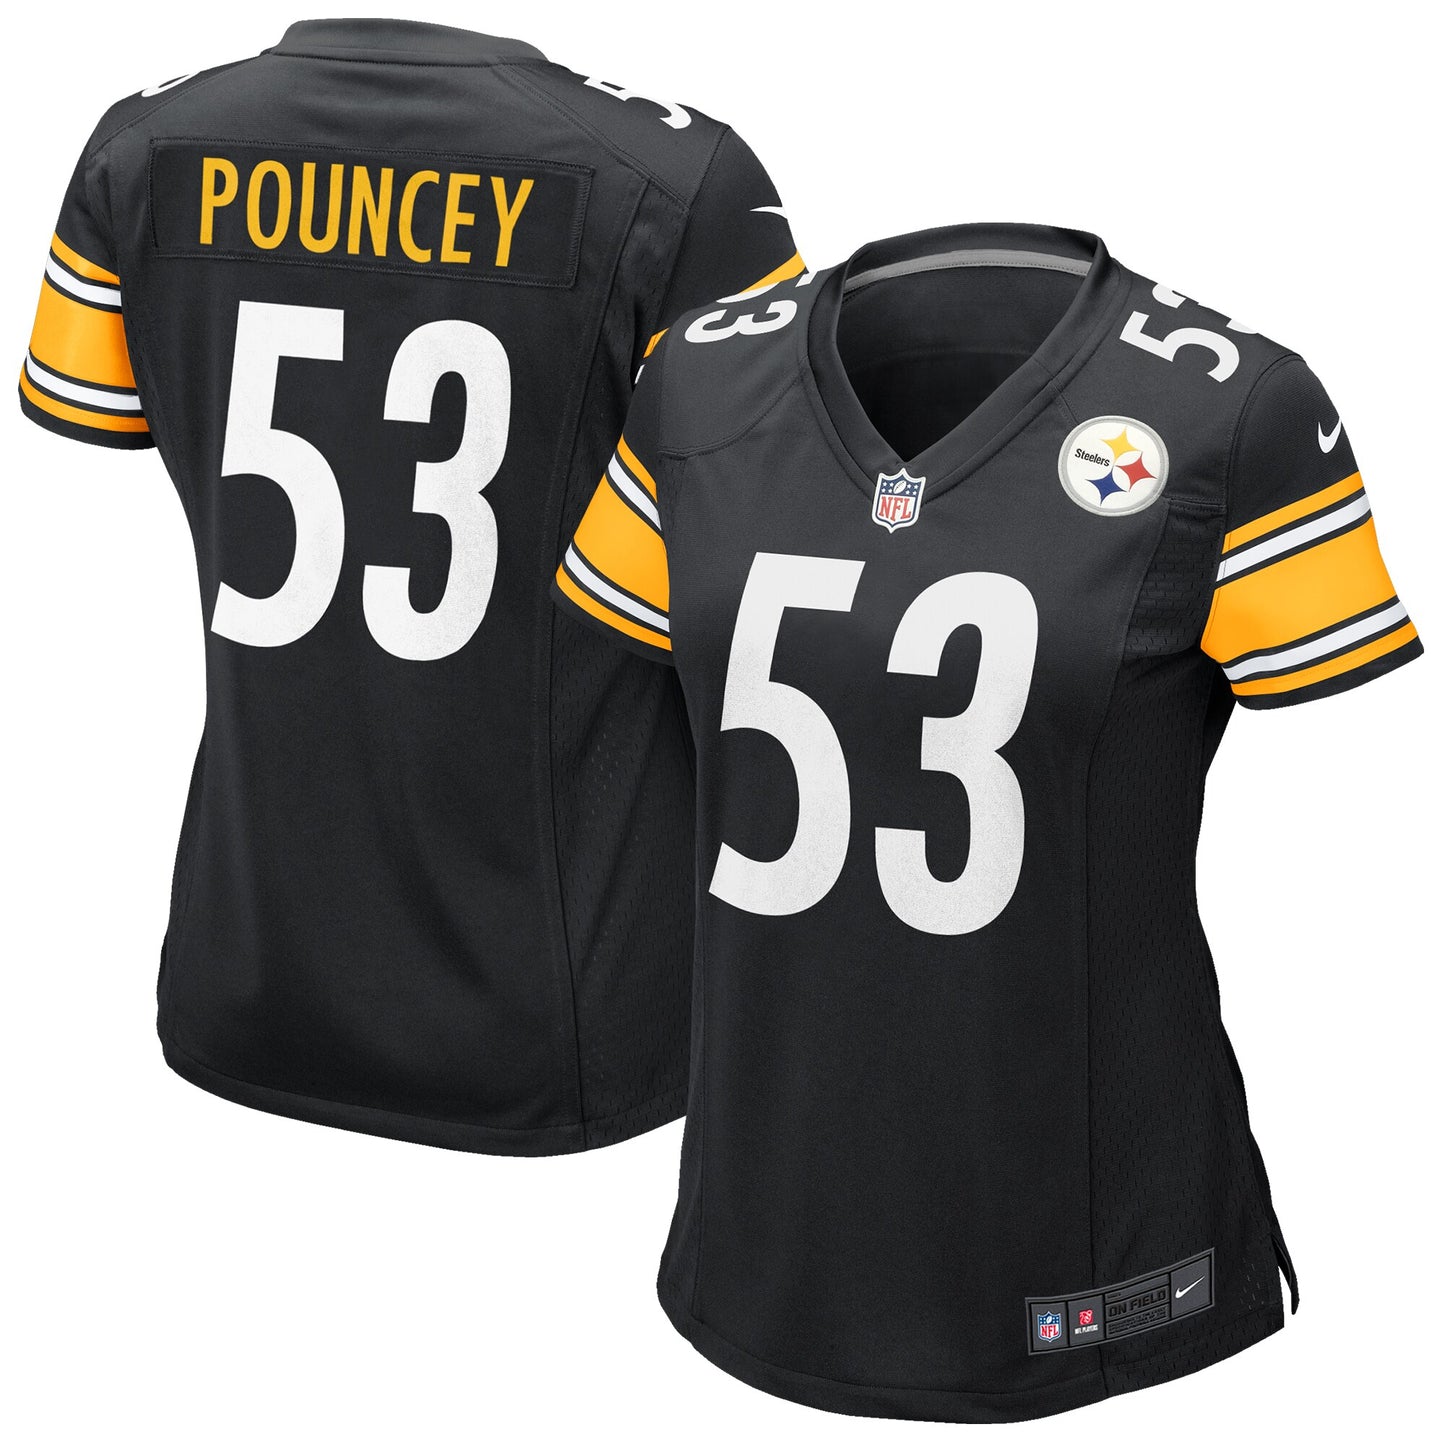 Maurkice Pouncey Pittsburgh Steelers Nike Women's Game Jersey - Black